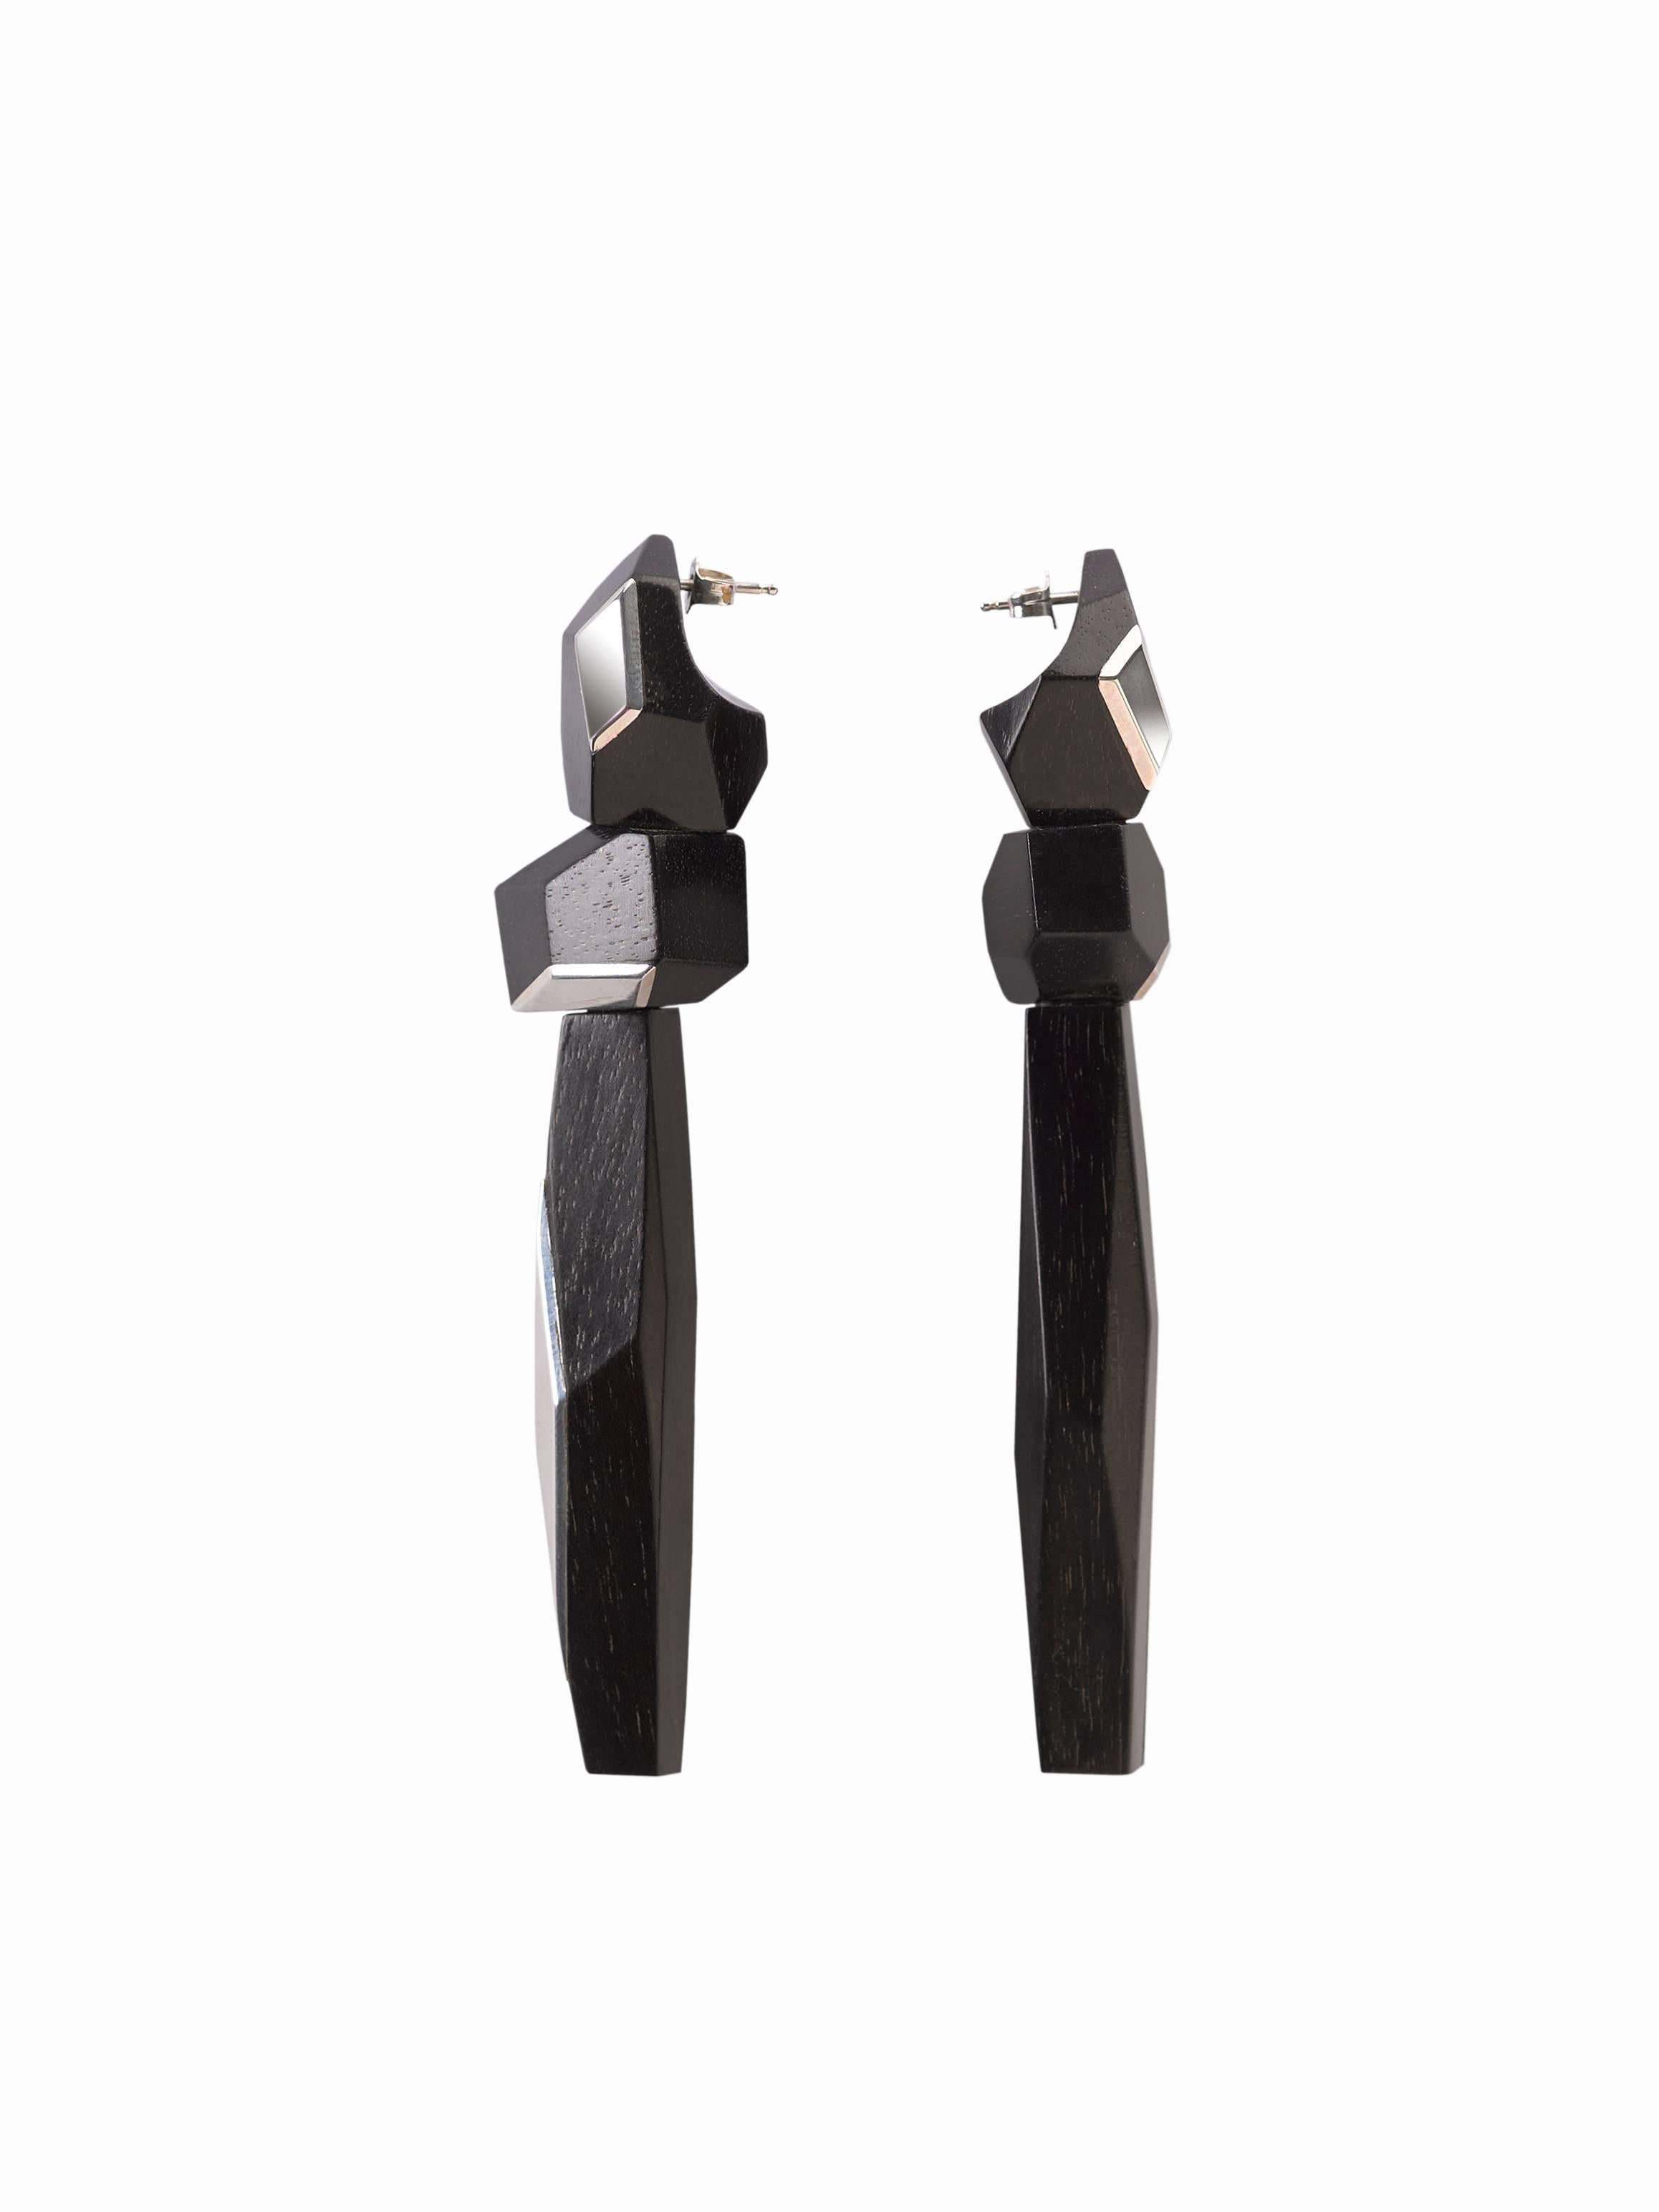 These pair of long dangling MATAR asymmetrical hand-carved ebony earrings celebrate the intricate craftsmanship of the past.  The jet black textured ebony is a perfect compliment to the high shine delicate sterling silver inlays.
These weightless